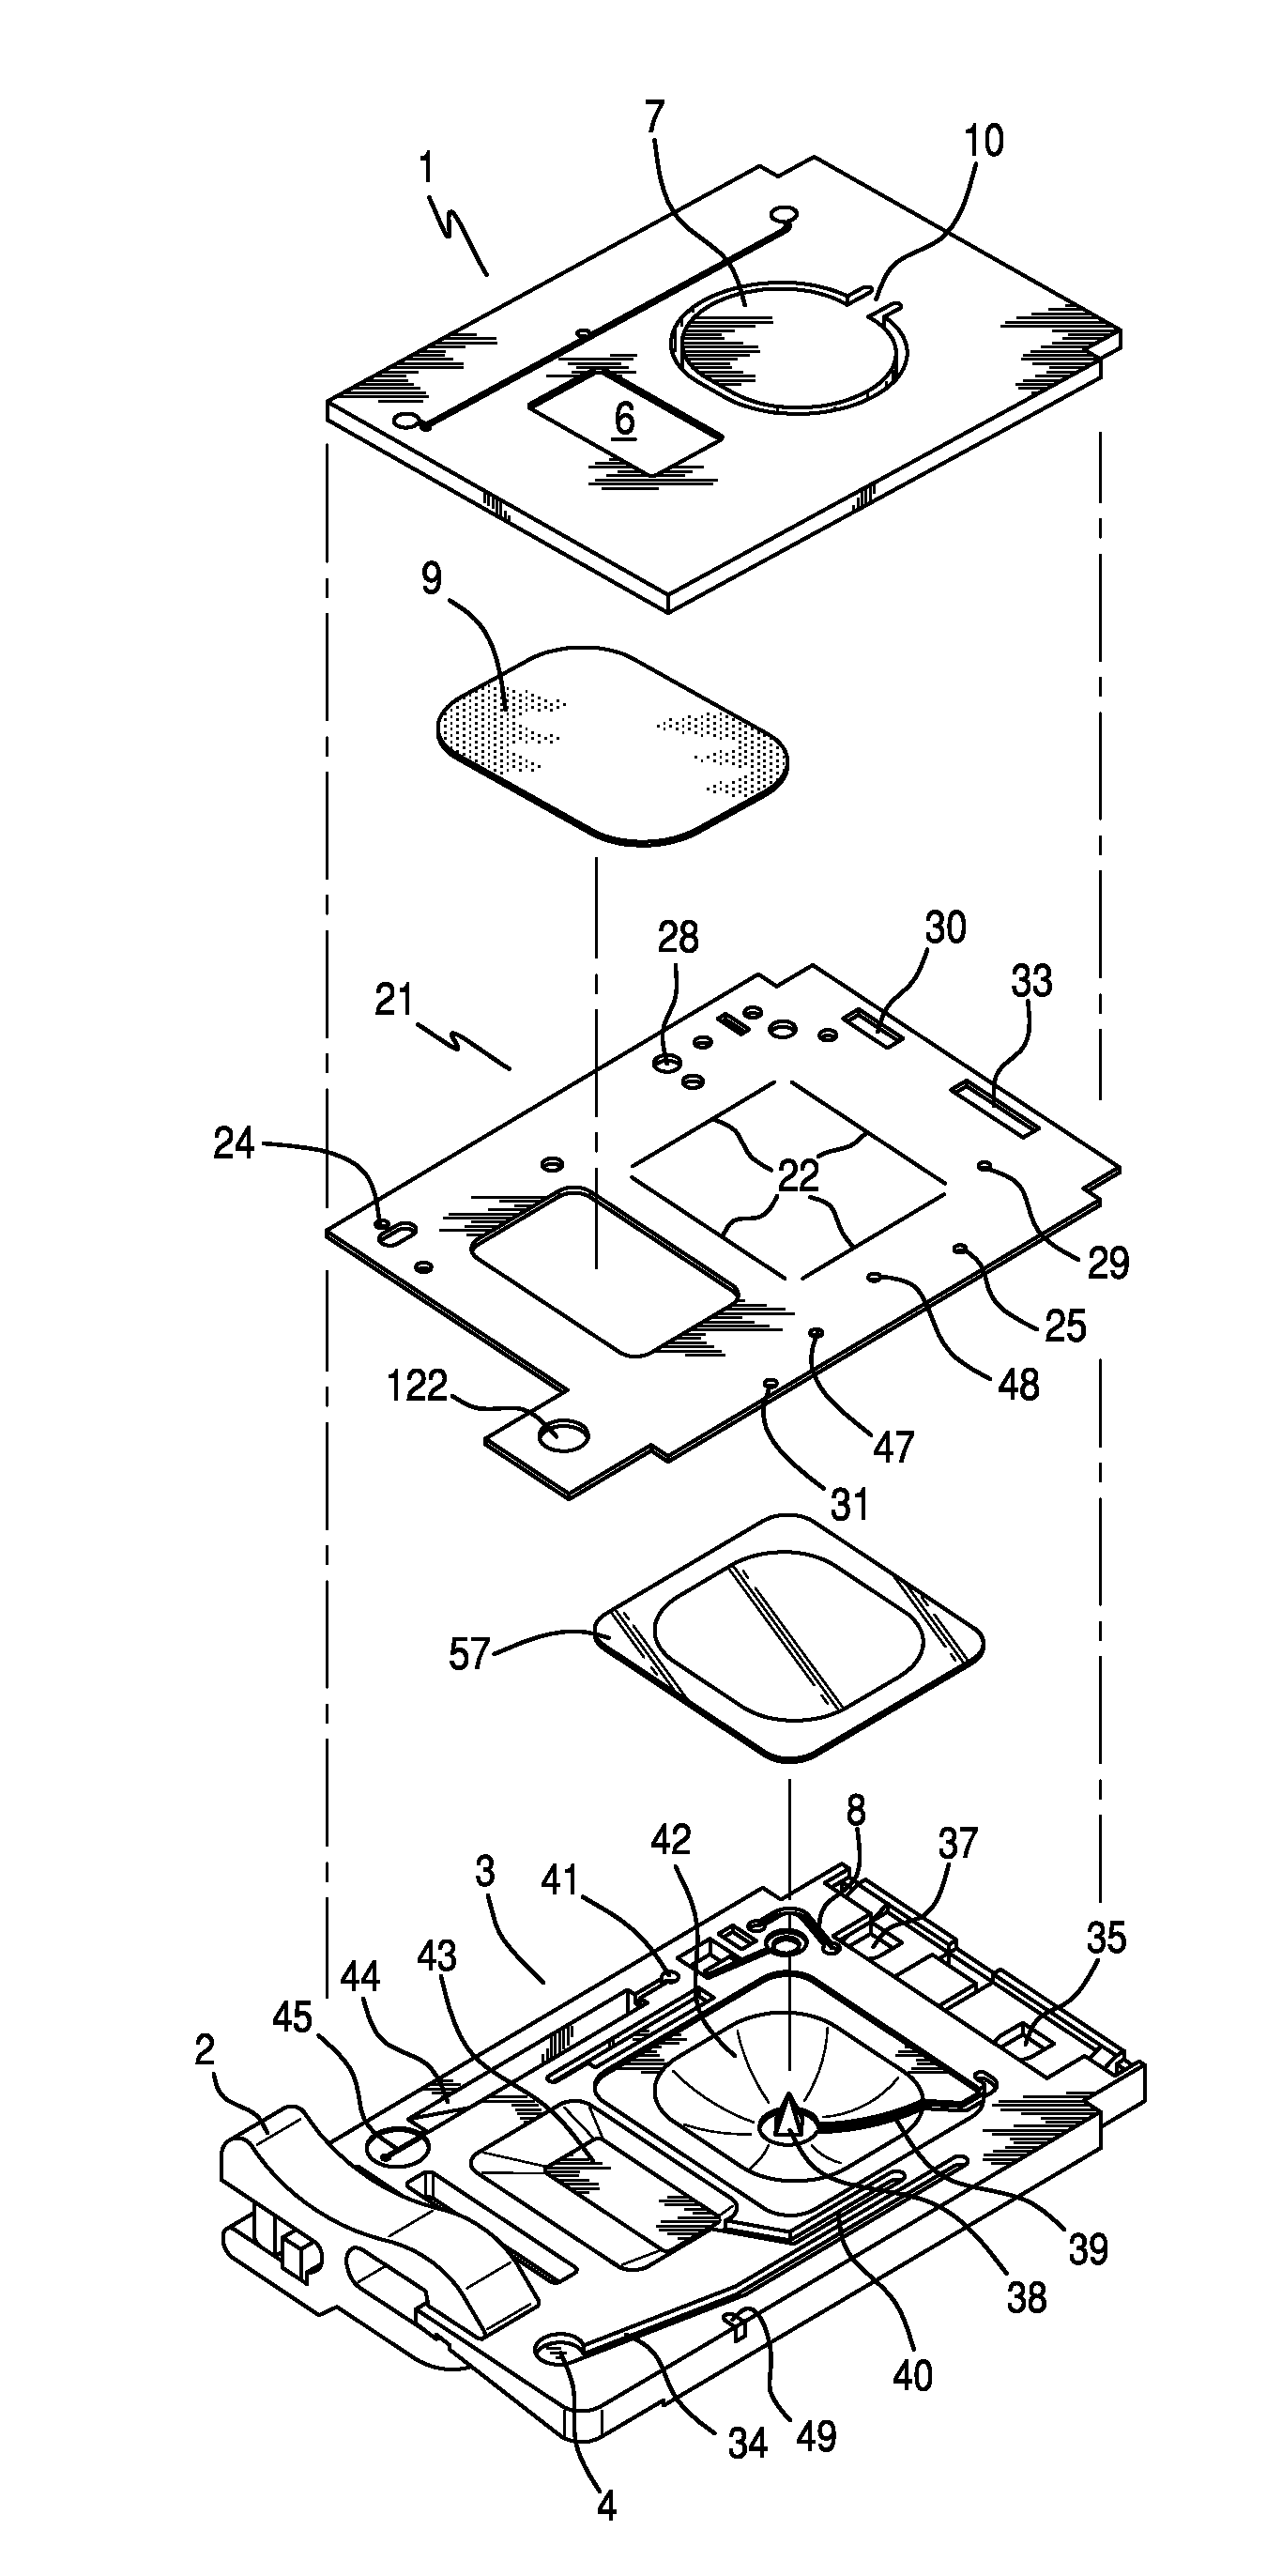 Assay Devices with Integrated Sample Dilution and Dilution Verification and Methods of Using Same